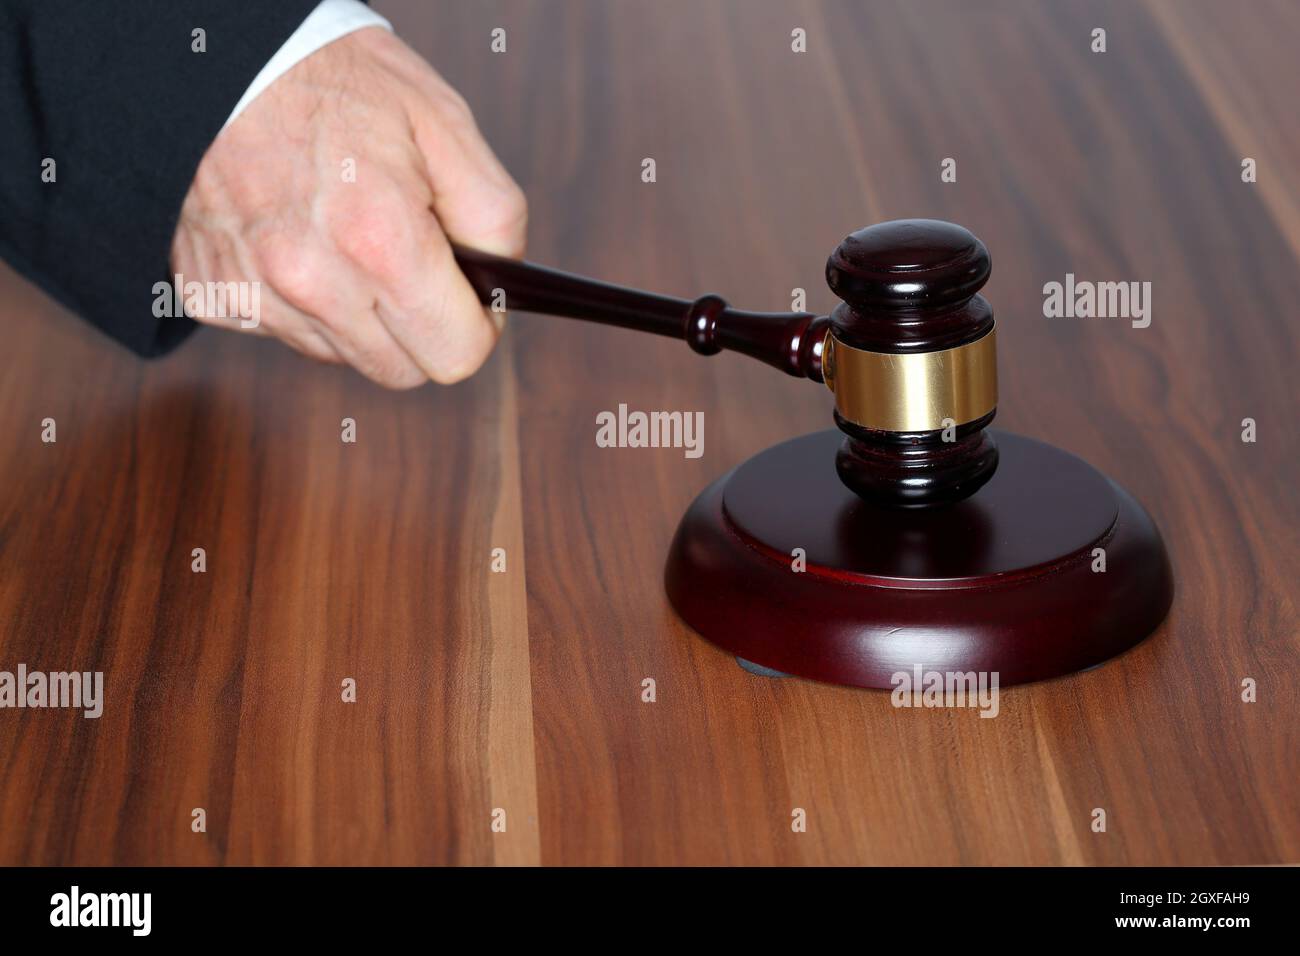 gavel and desk, symbolic rights and justice Stock Photo